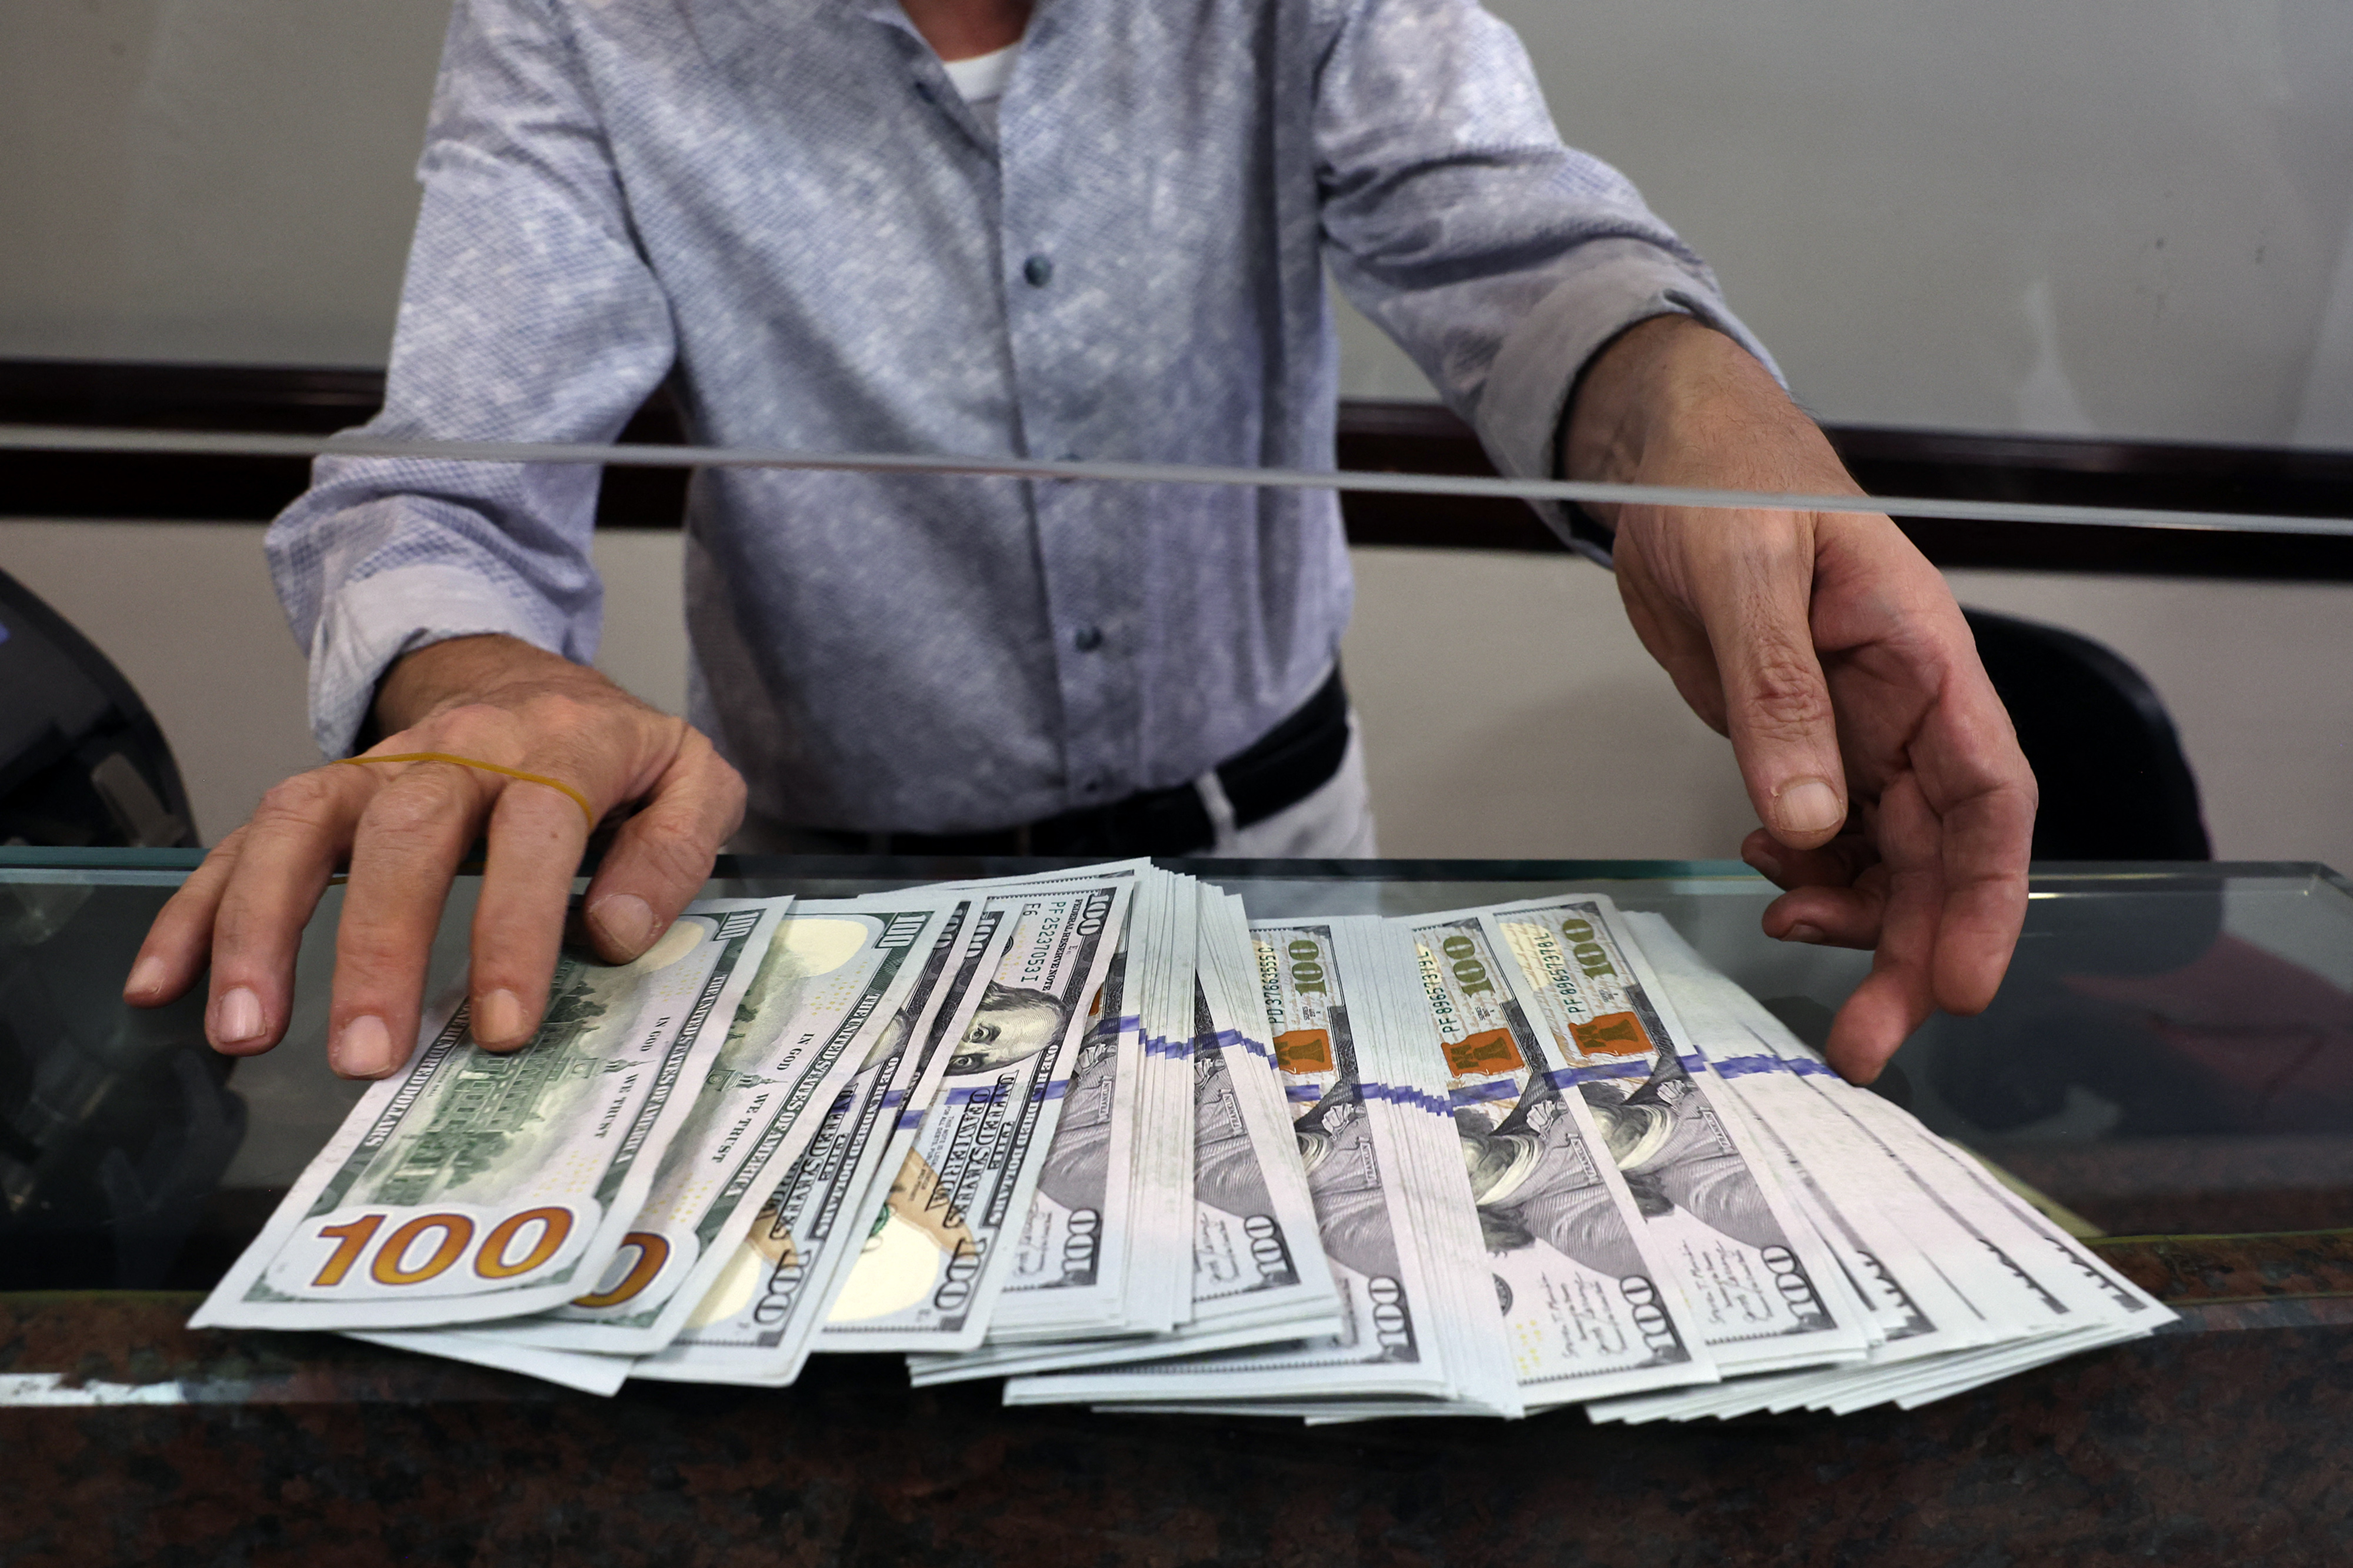 A teller shows US dollar bills at an exchange office in Ankara on July 20, 2023. Turkey's central bank hiked its main interest rate for the second month in a row, but analysts said the unwinding of President Recep Tayyip Erdogan's unconventional policy was too timid to tame inflation. After years of cuts that aimed to boost growth but fuelled inflation and caused the lira to tumble, the bank doubled its rate last month from 8.5 percent to 15 percent. The latest hike was smaller, at 2.5 percentage points, taking the rate to 17.5 percent. (Photo by Adem ALTAN / AFP) (Photo by ADEM ALTAN/AFP via Getty Images)